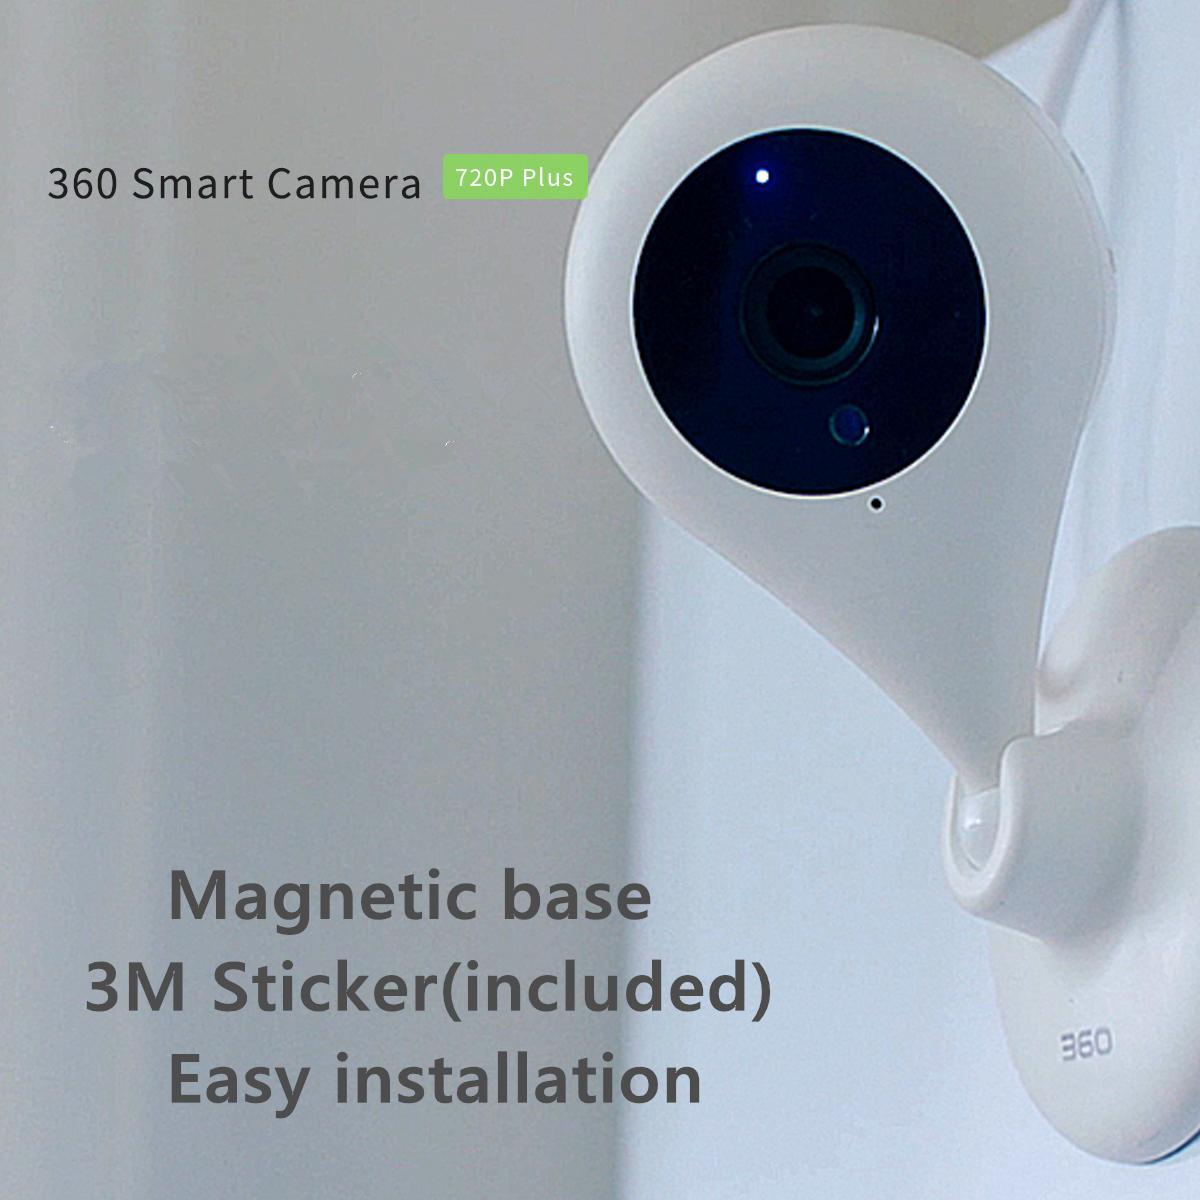 360 D603 720P Wireless IP Camera CCTV Home WiIFI Security Camera 110 Degree 7M Night Vision Baby Monitor